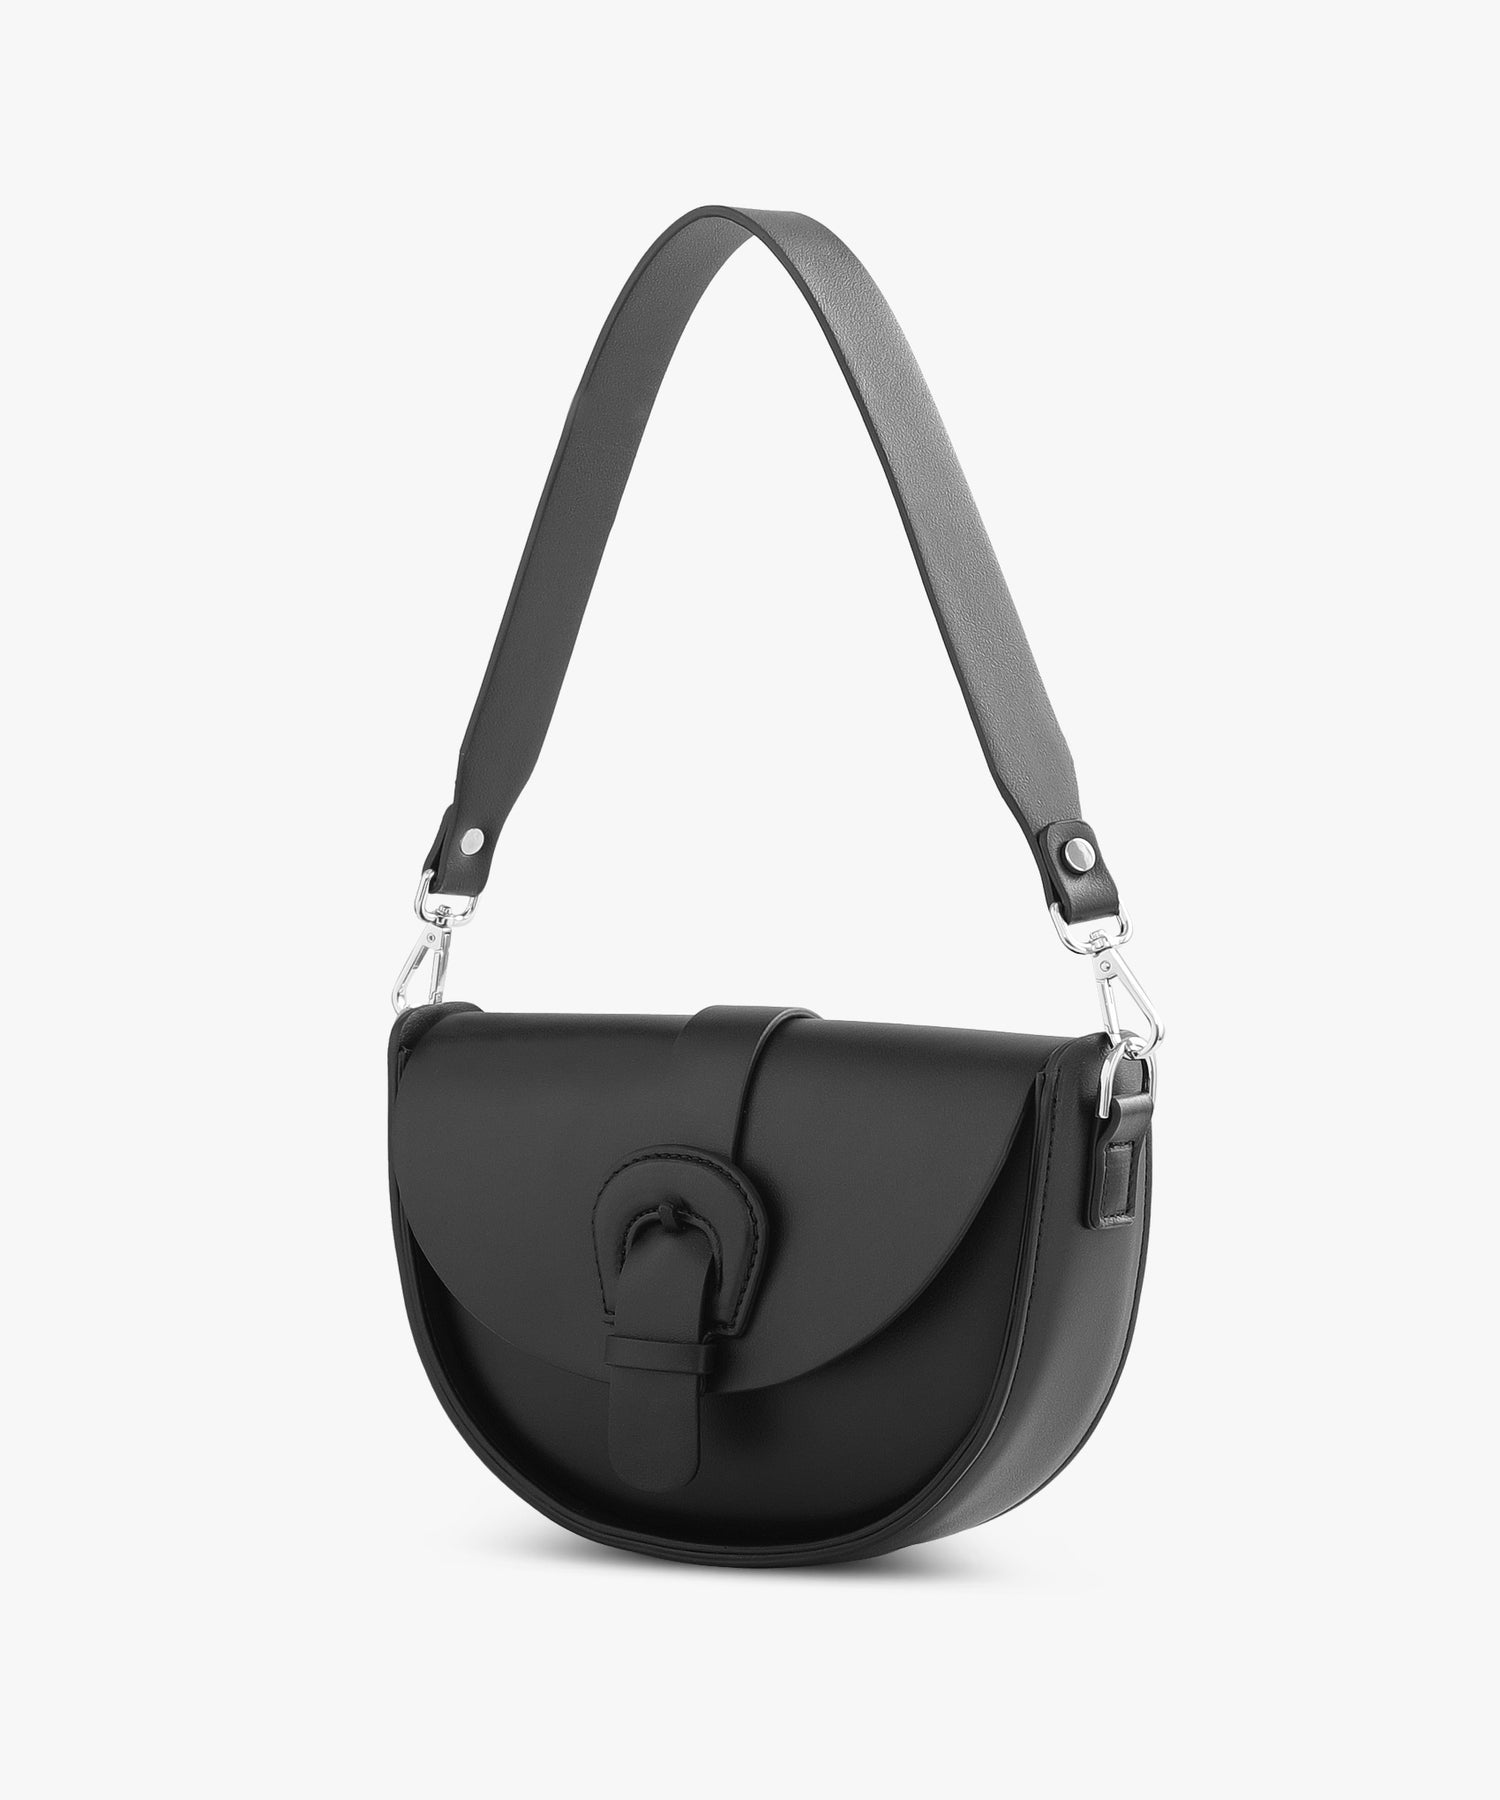 Marco Saddle Bag - Black – Ovonzo - handmade leather bags by artisans